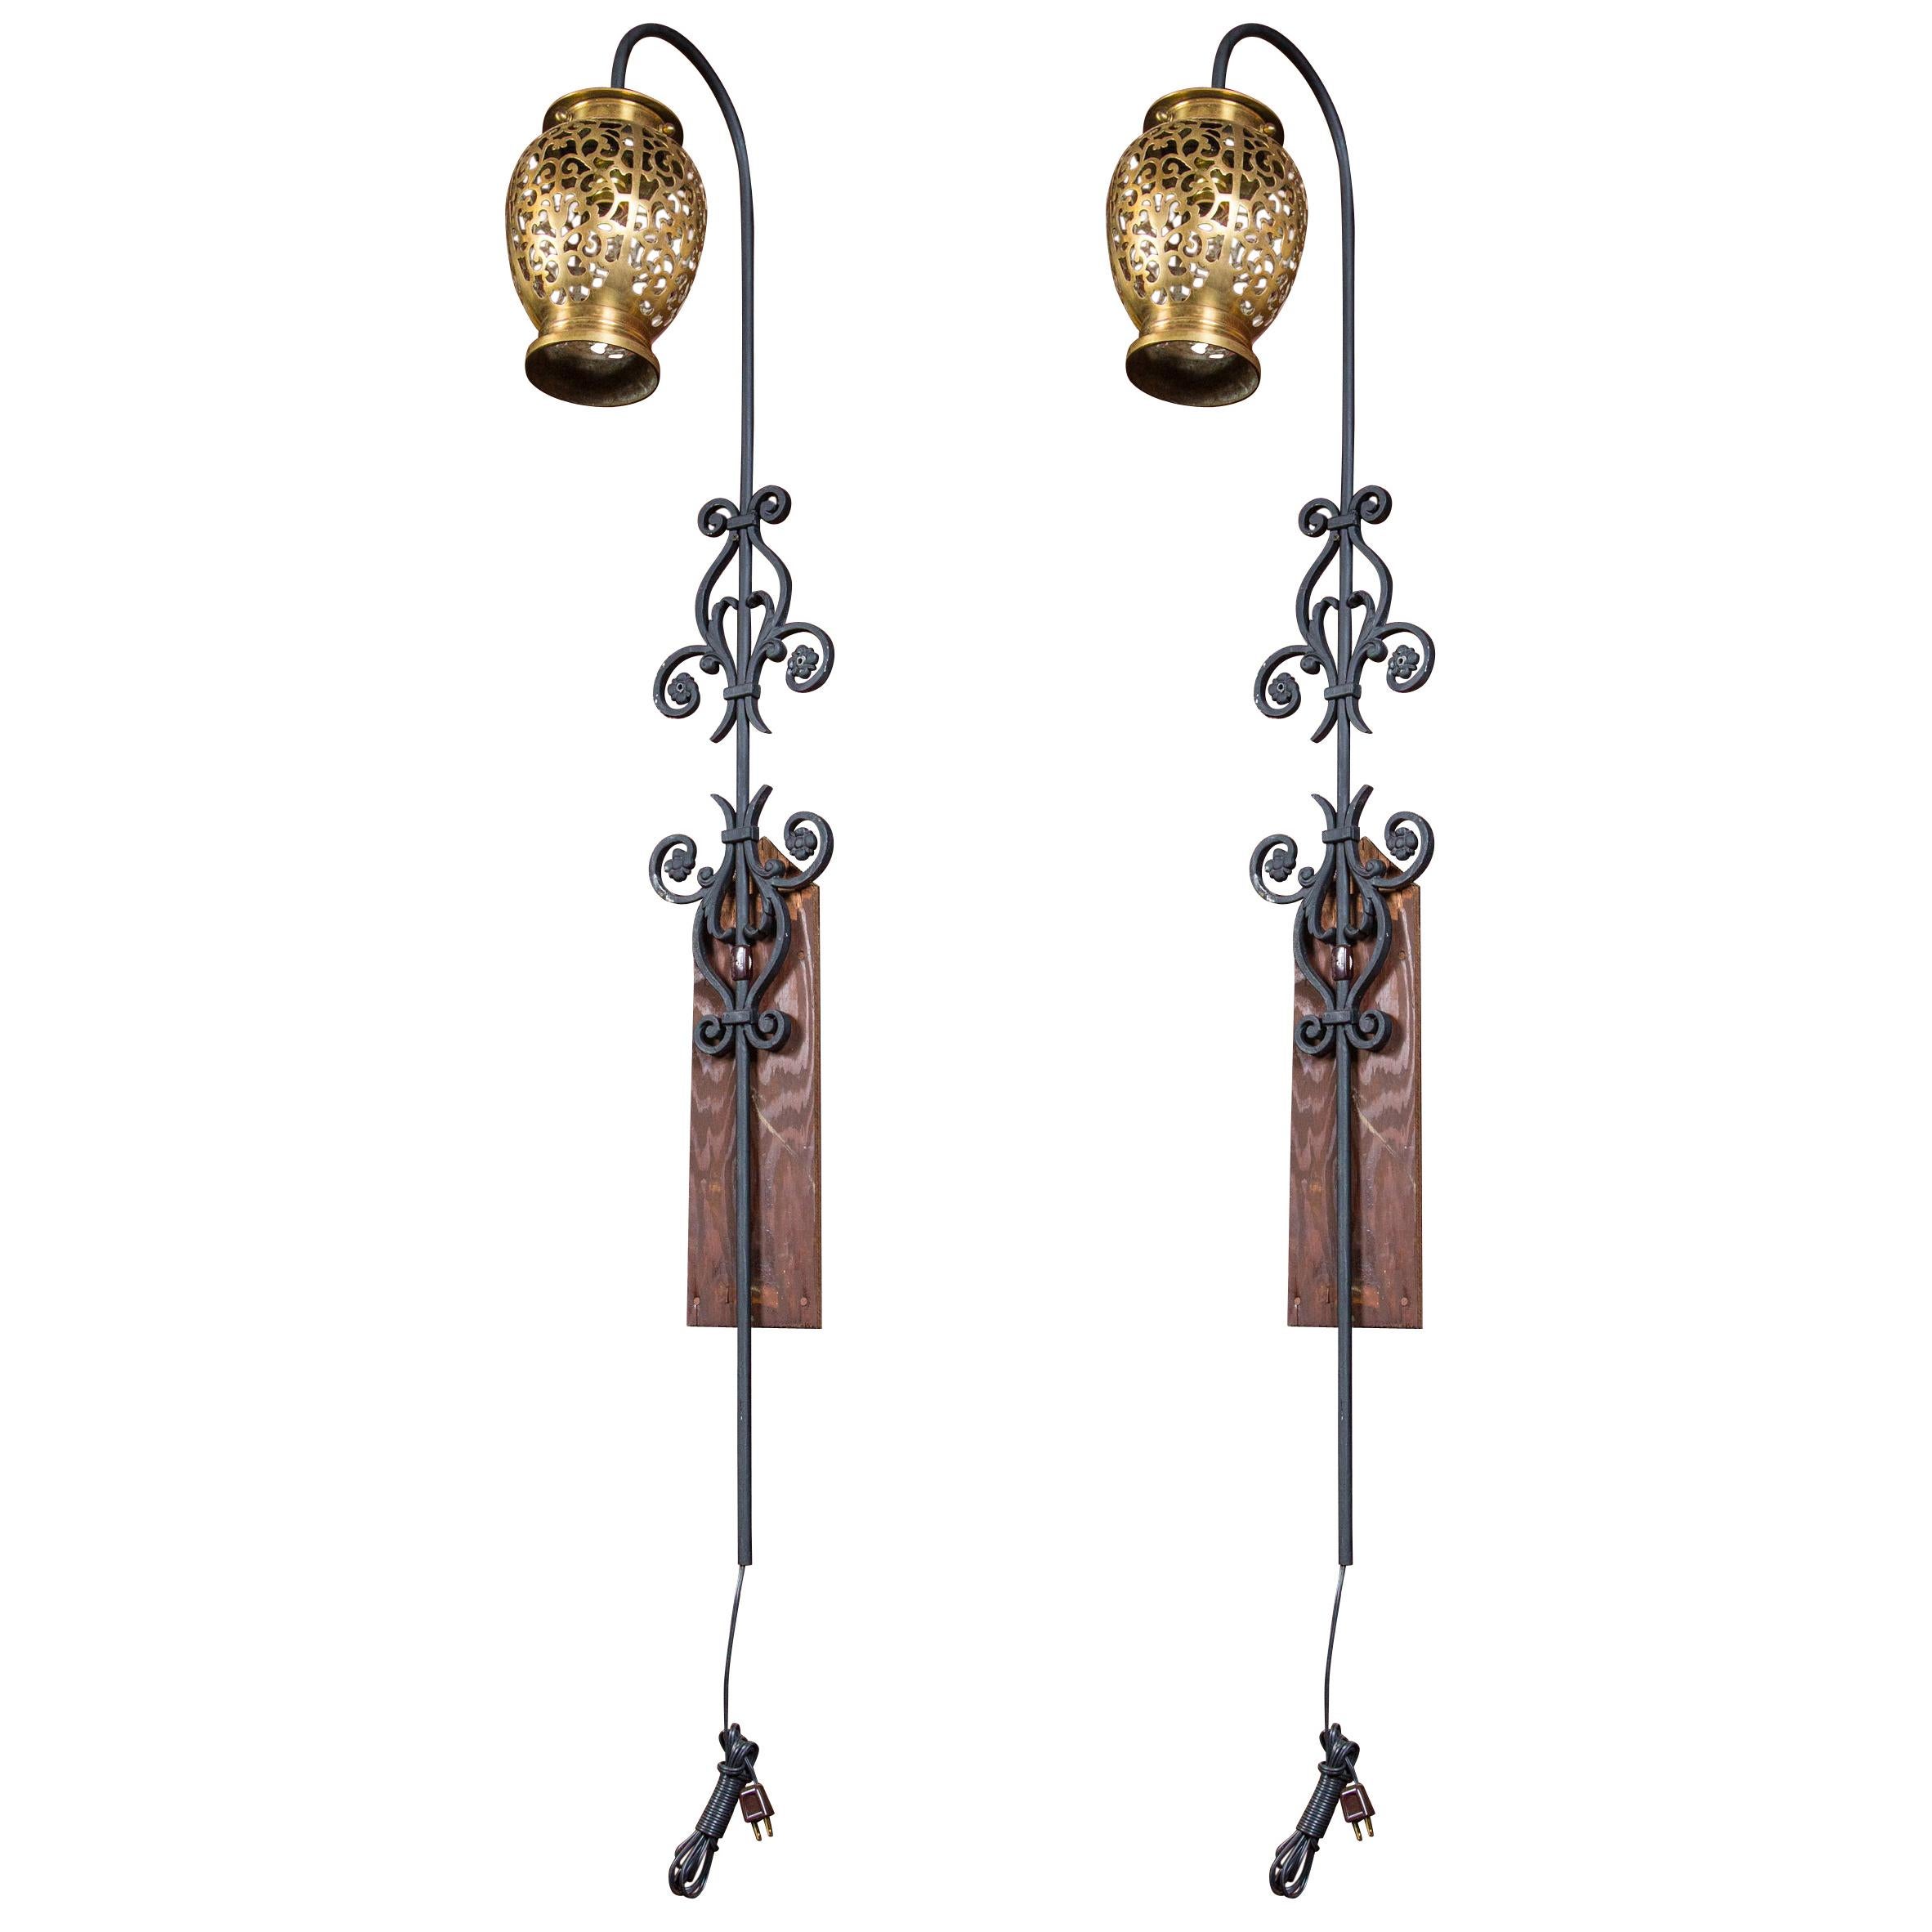 Pair of Tall Wrought Iron Wall Sconces with Hanging Brass Moroccan Lanterns For Sale